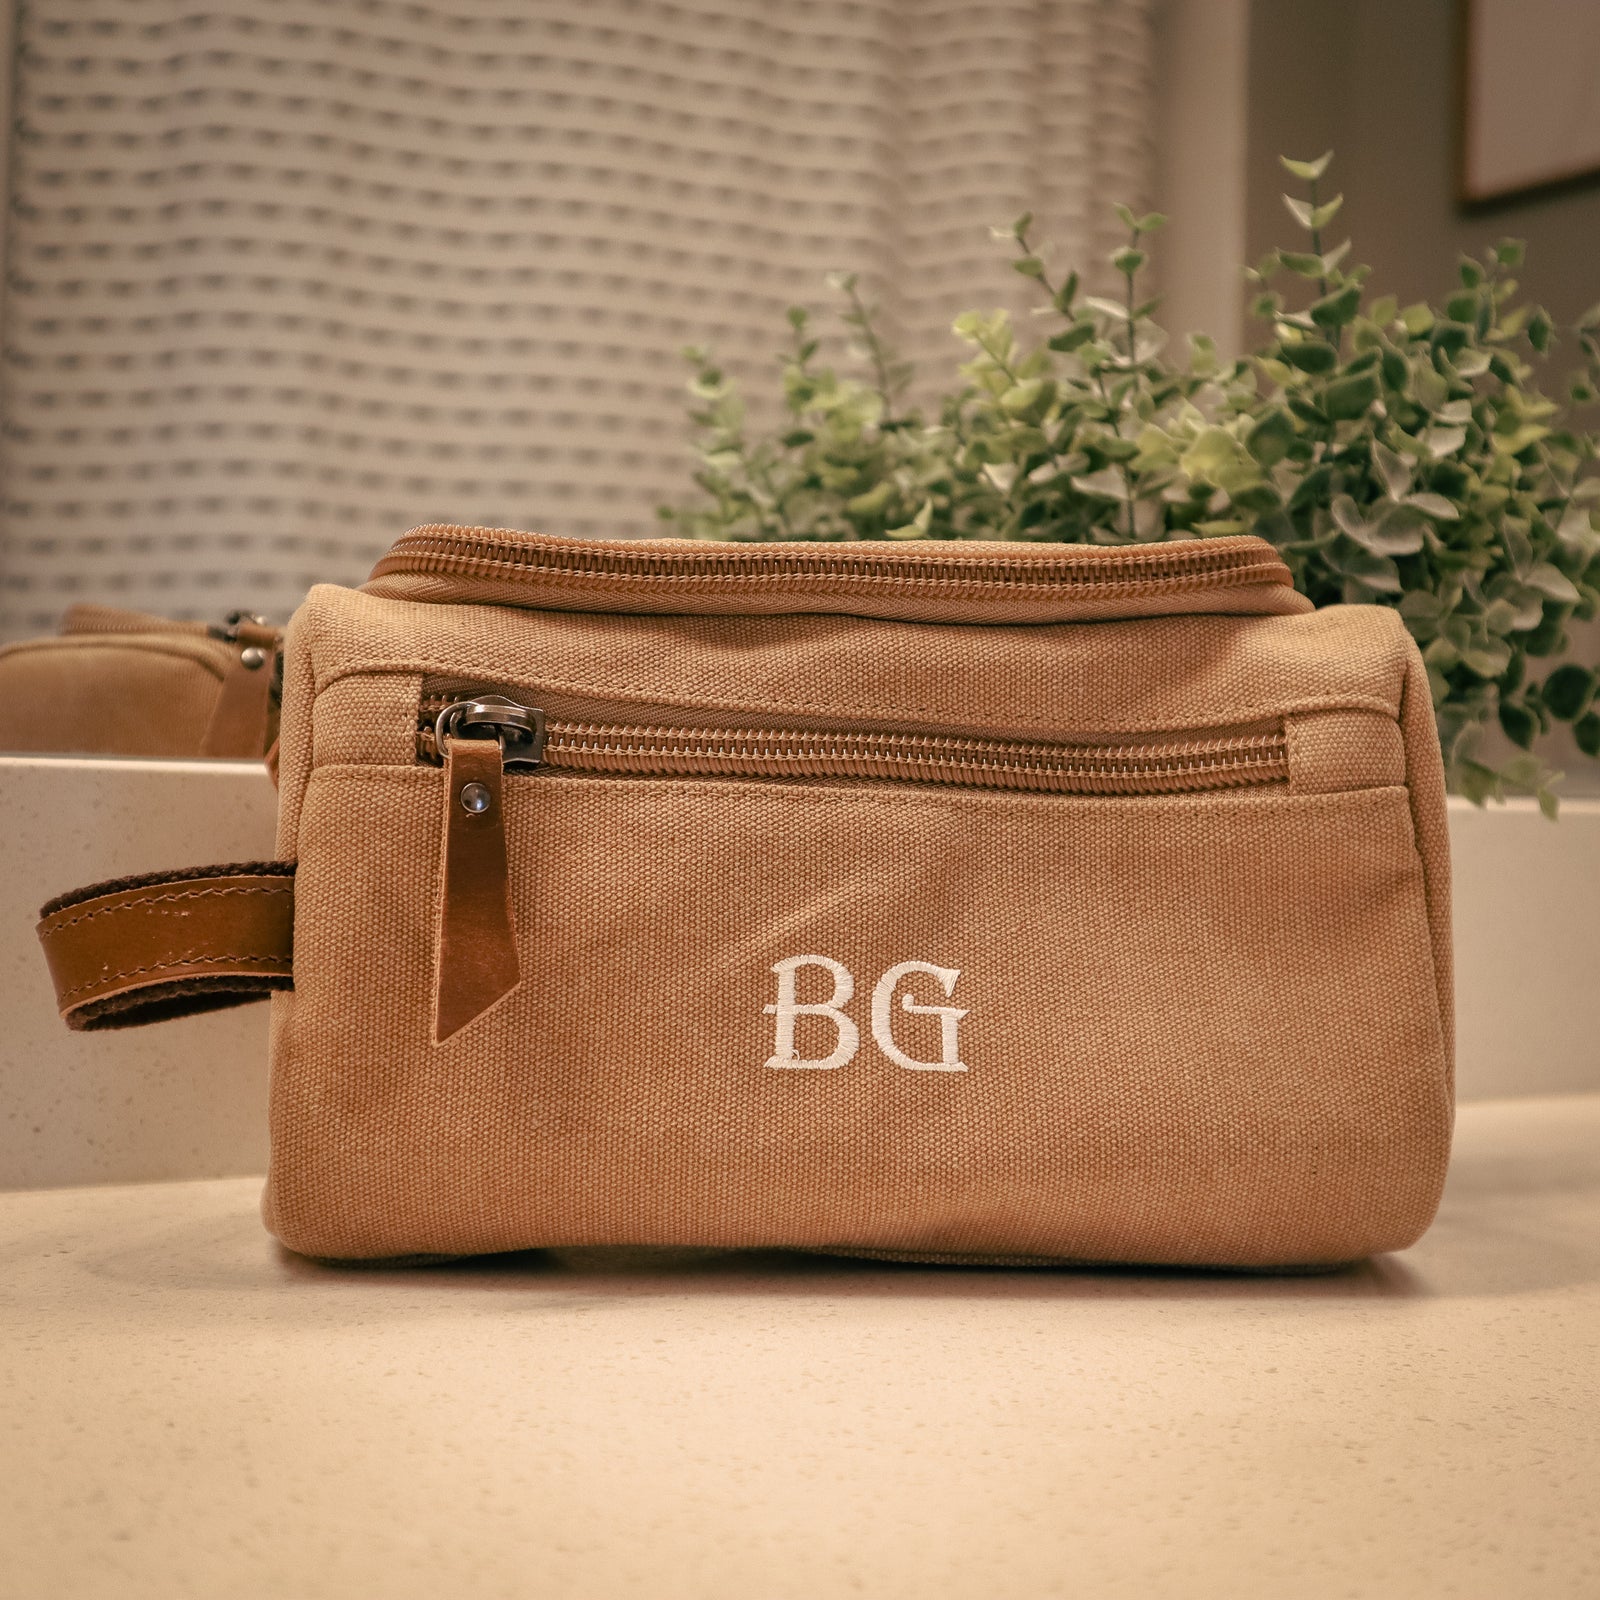 Personalized Engraved Genuine Leather Cosmetic Bag